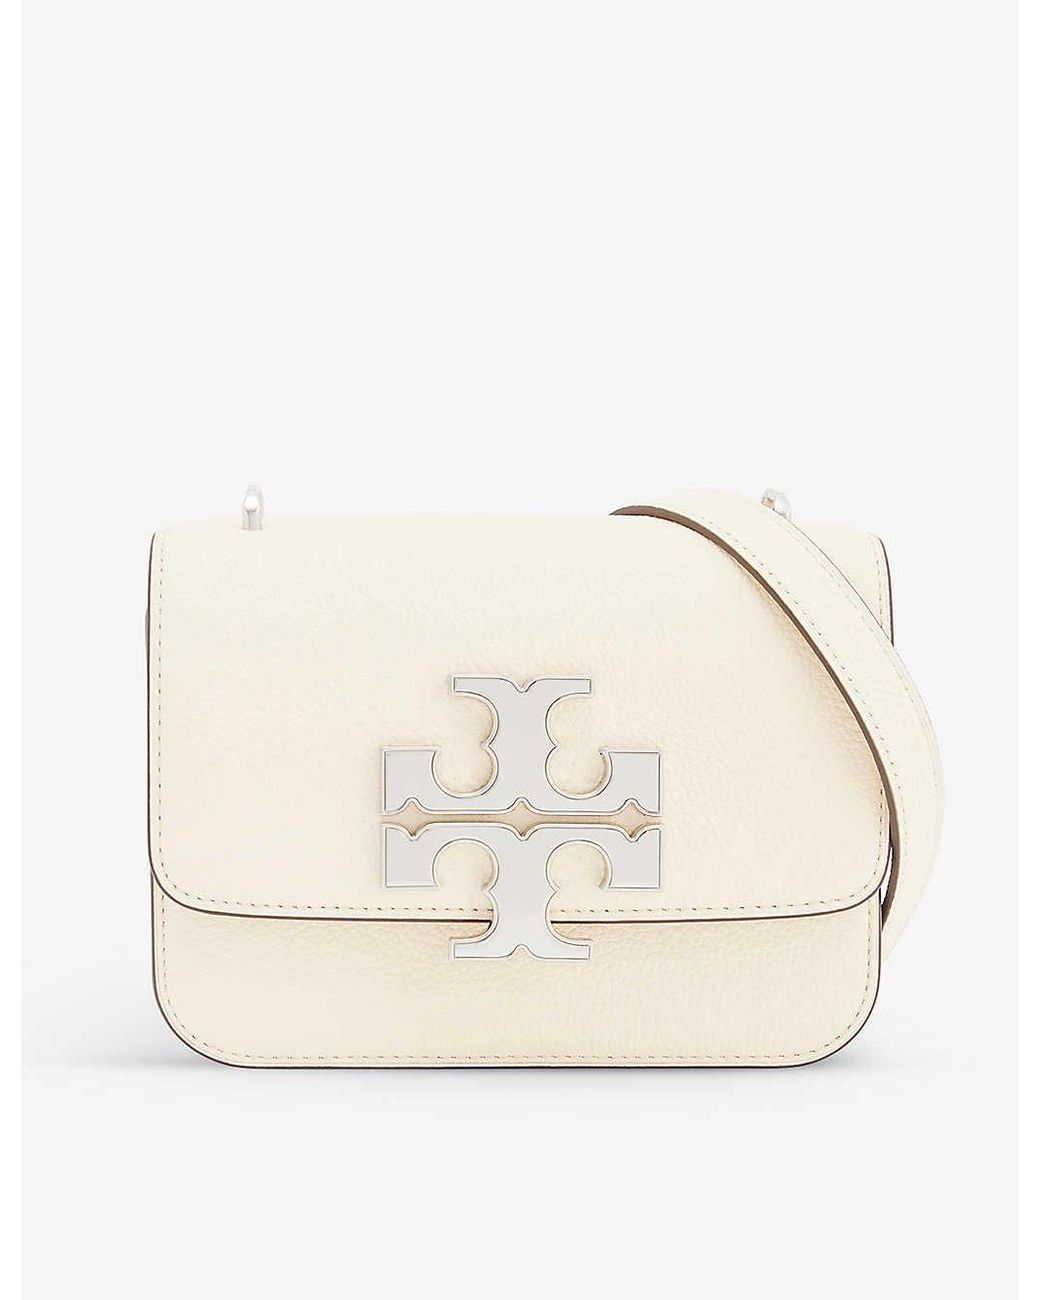 Tory Burch Eleanor Small Leather Shoulder Bag in Natural | Lyst